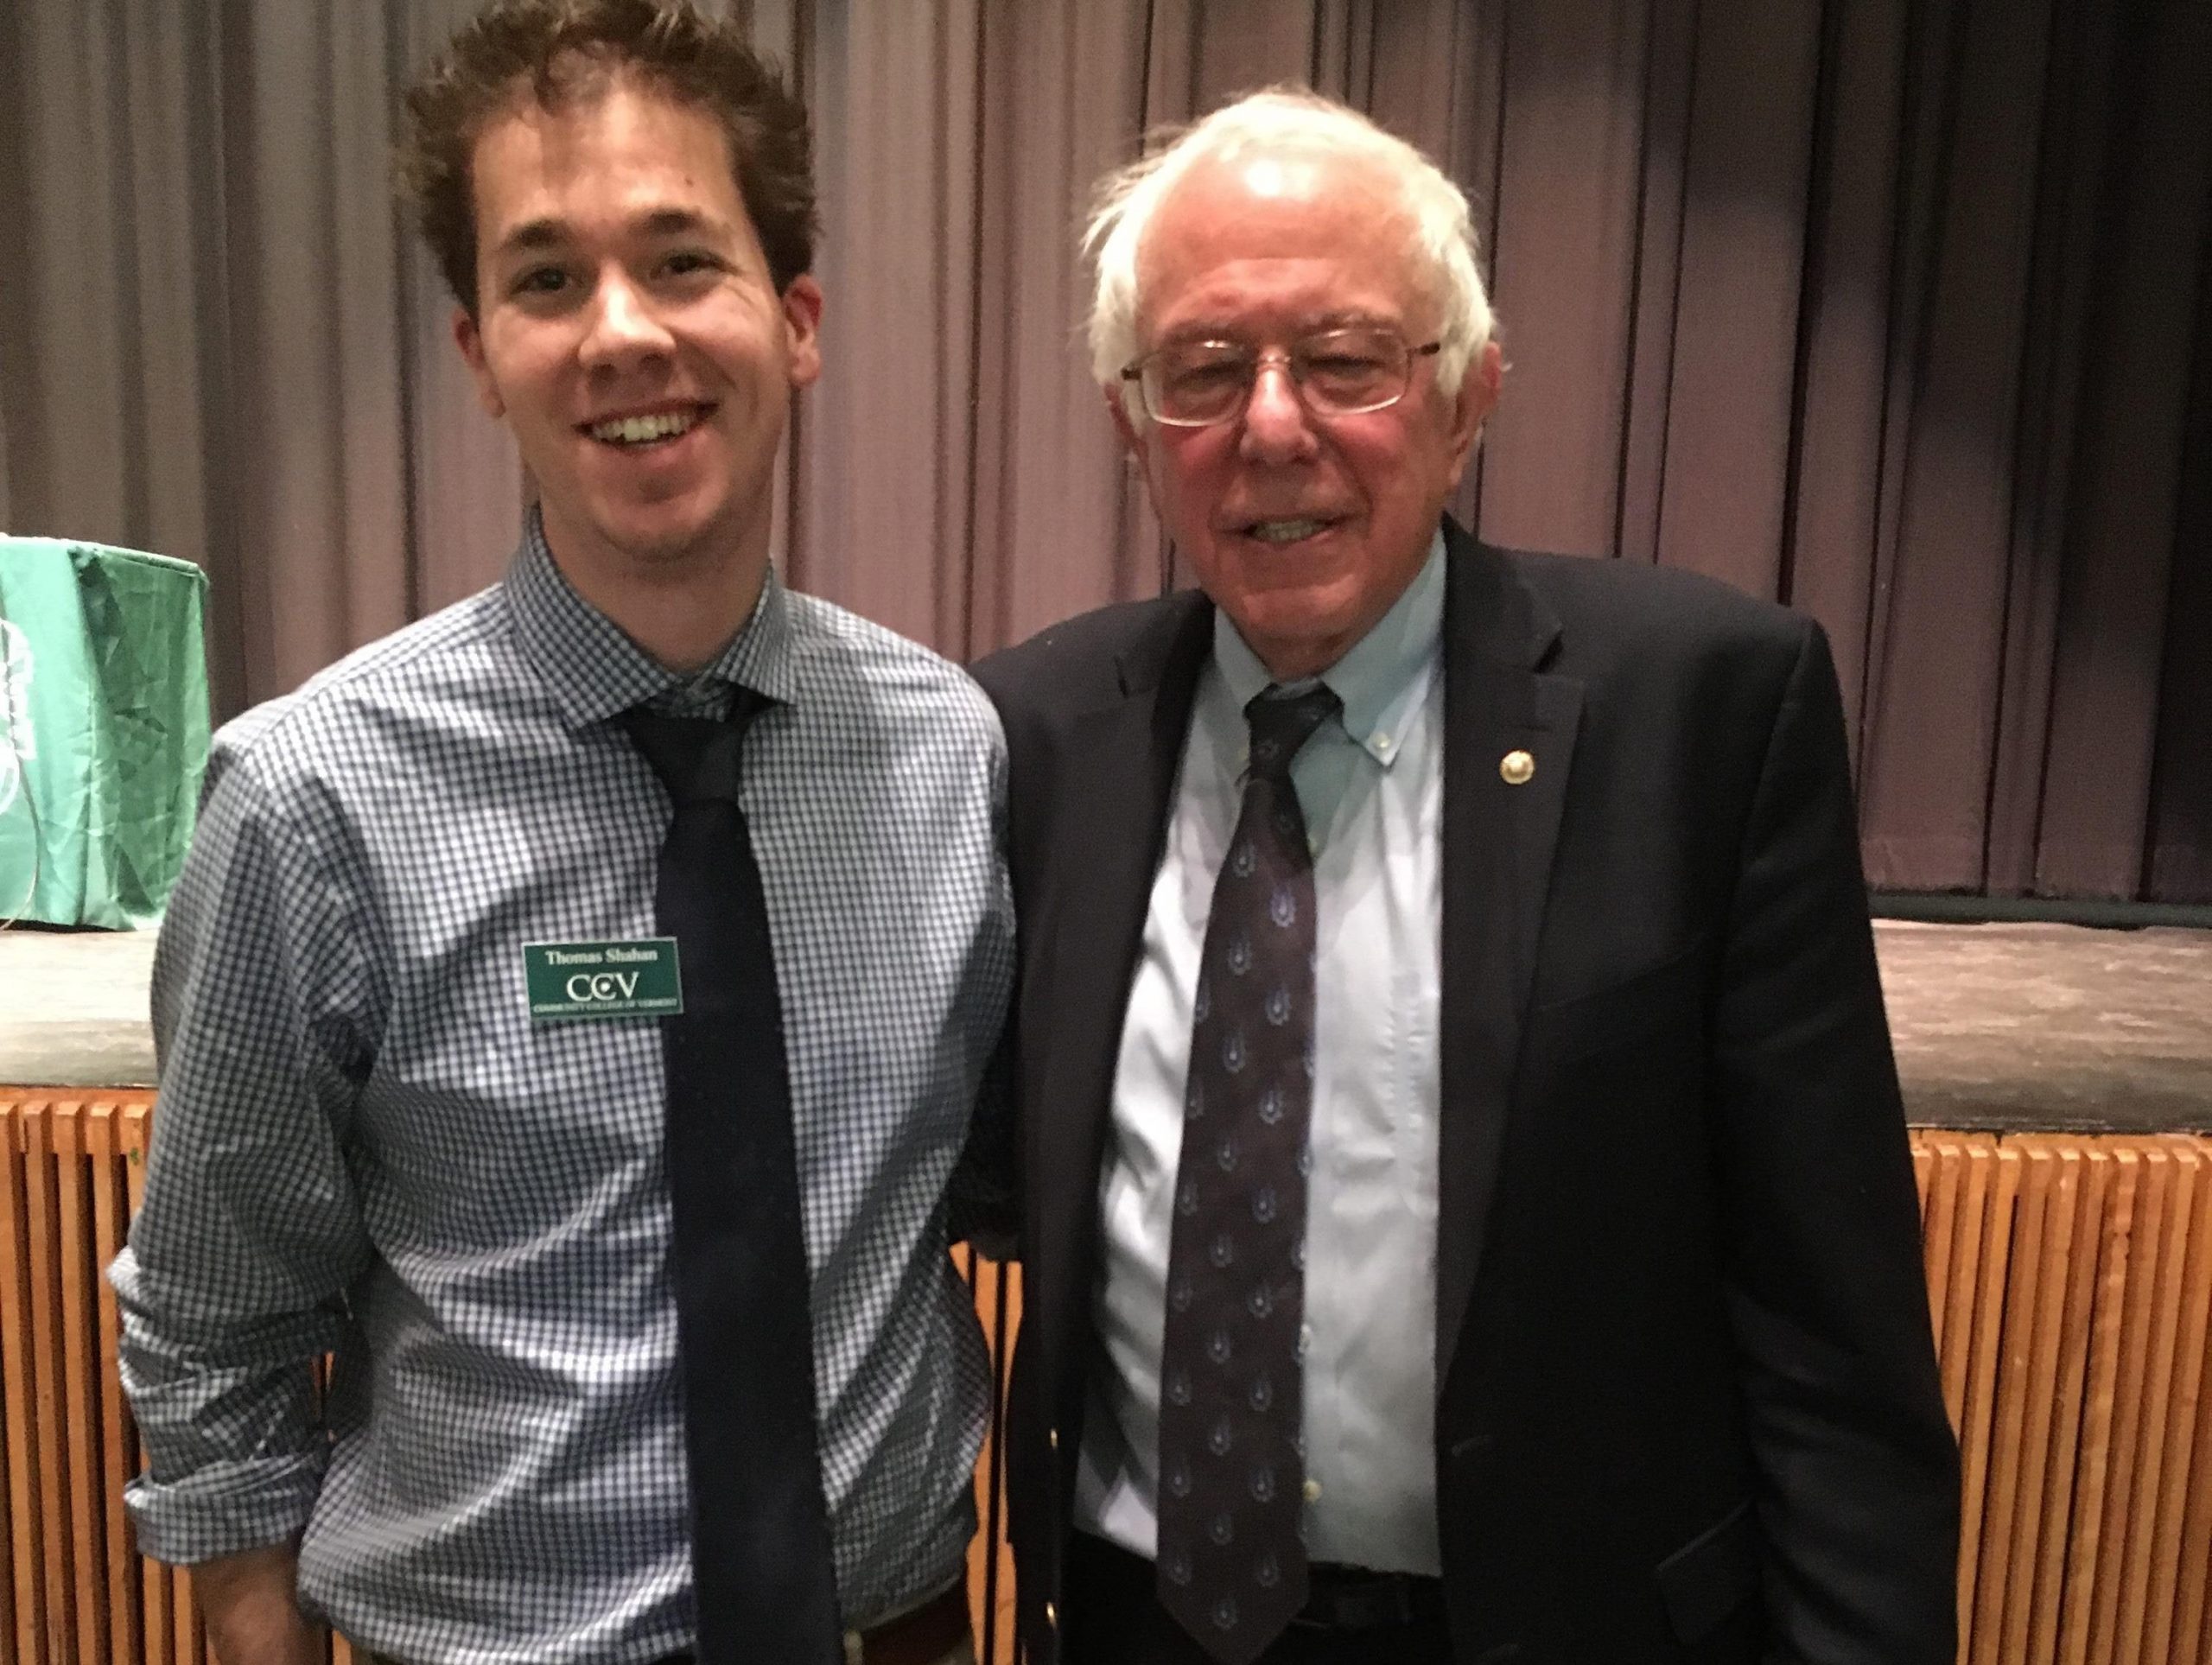 Social Media Specialist Tom Shahan gets some love from Bernie at the Springfield College and Career Fair.